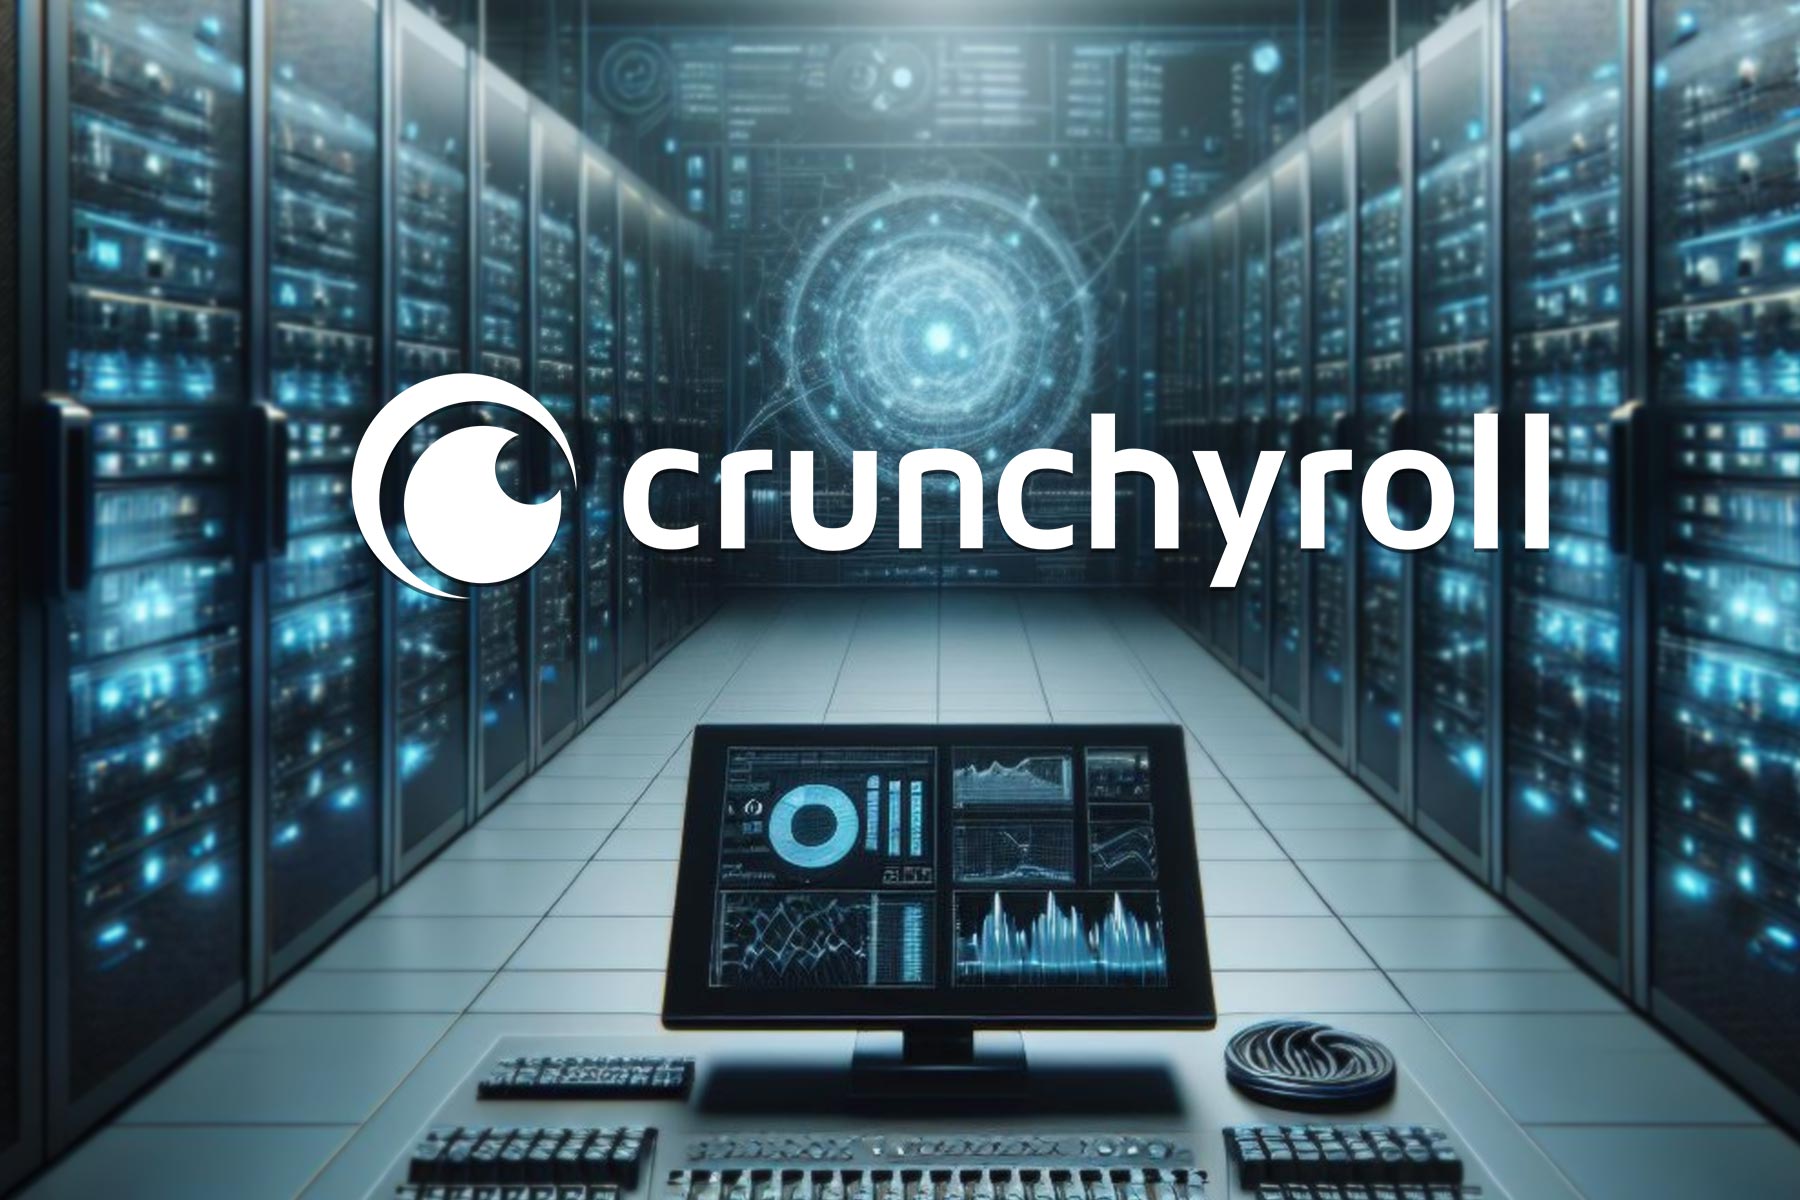 After last week’s flop, Crunchyroll is now down. But here’s what you can do